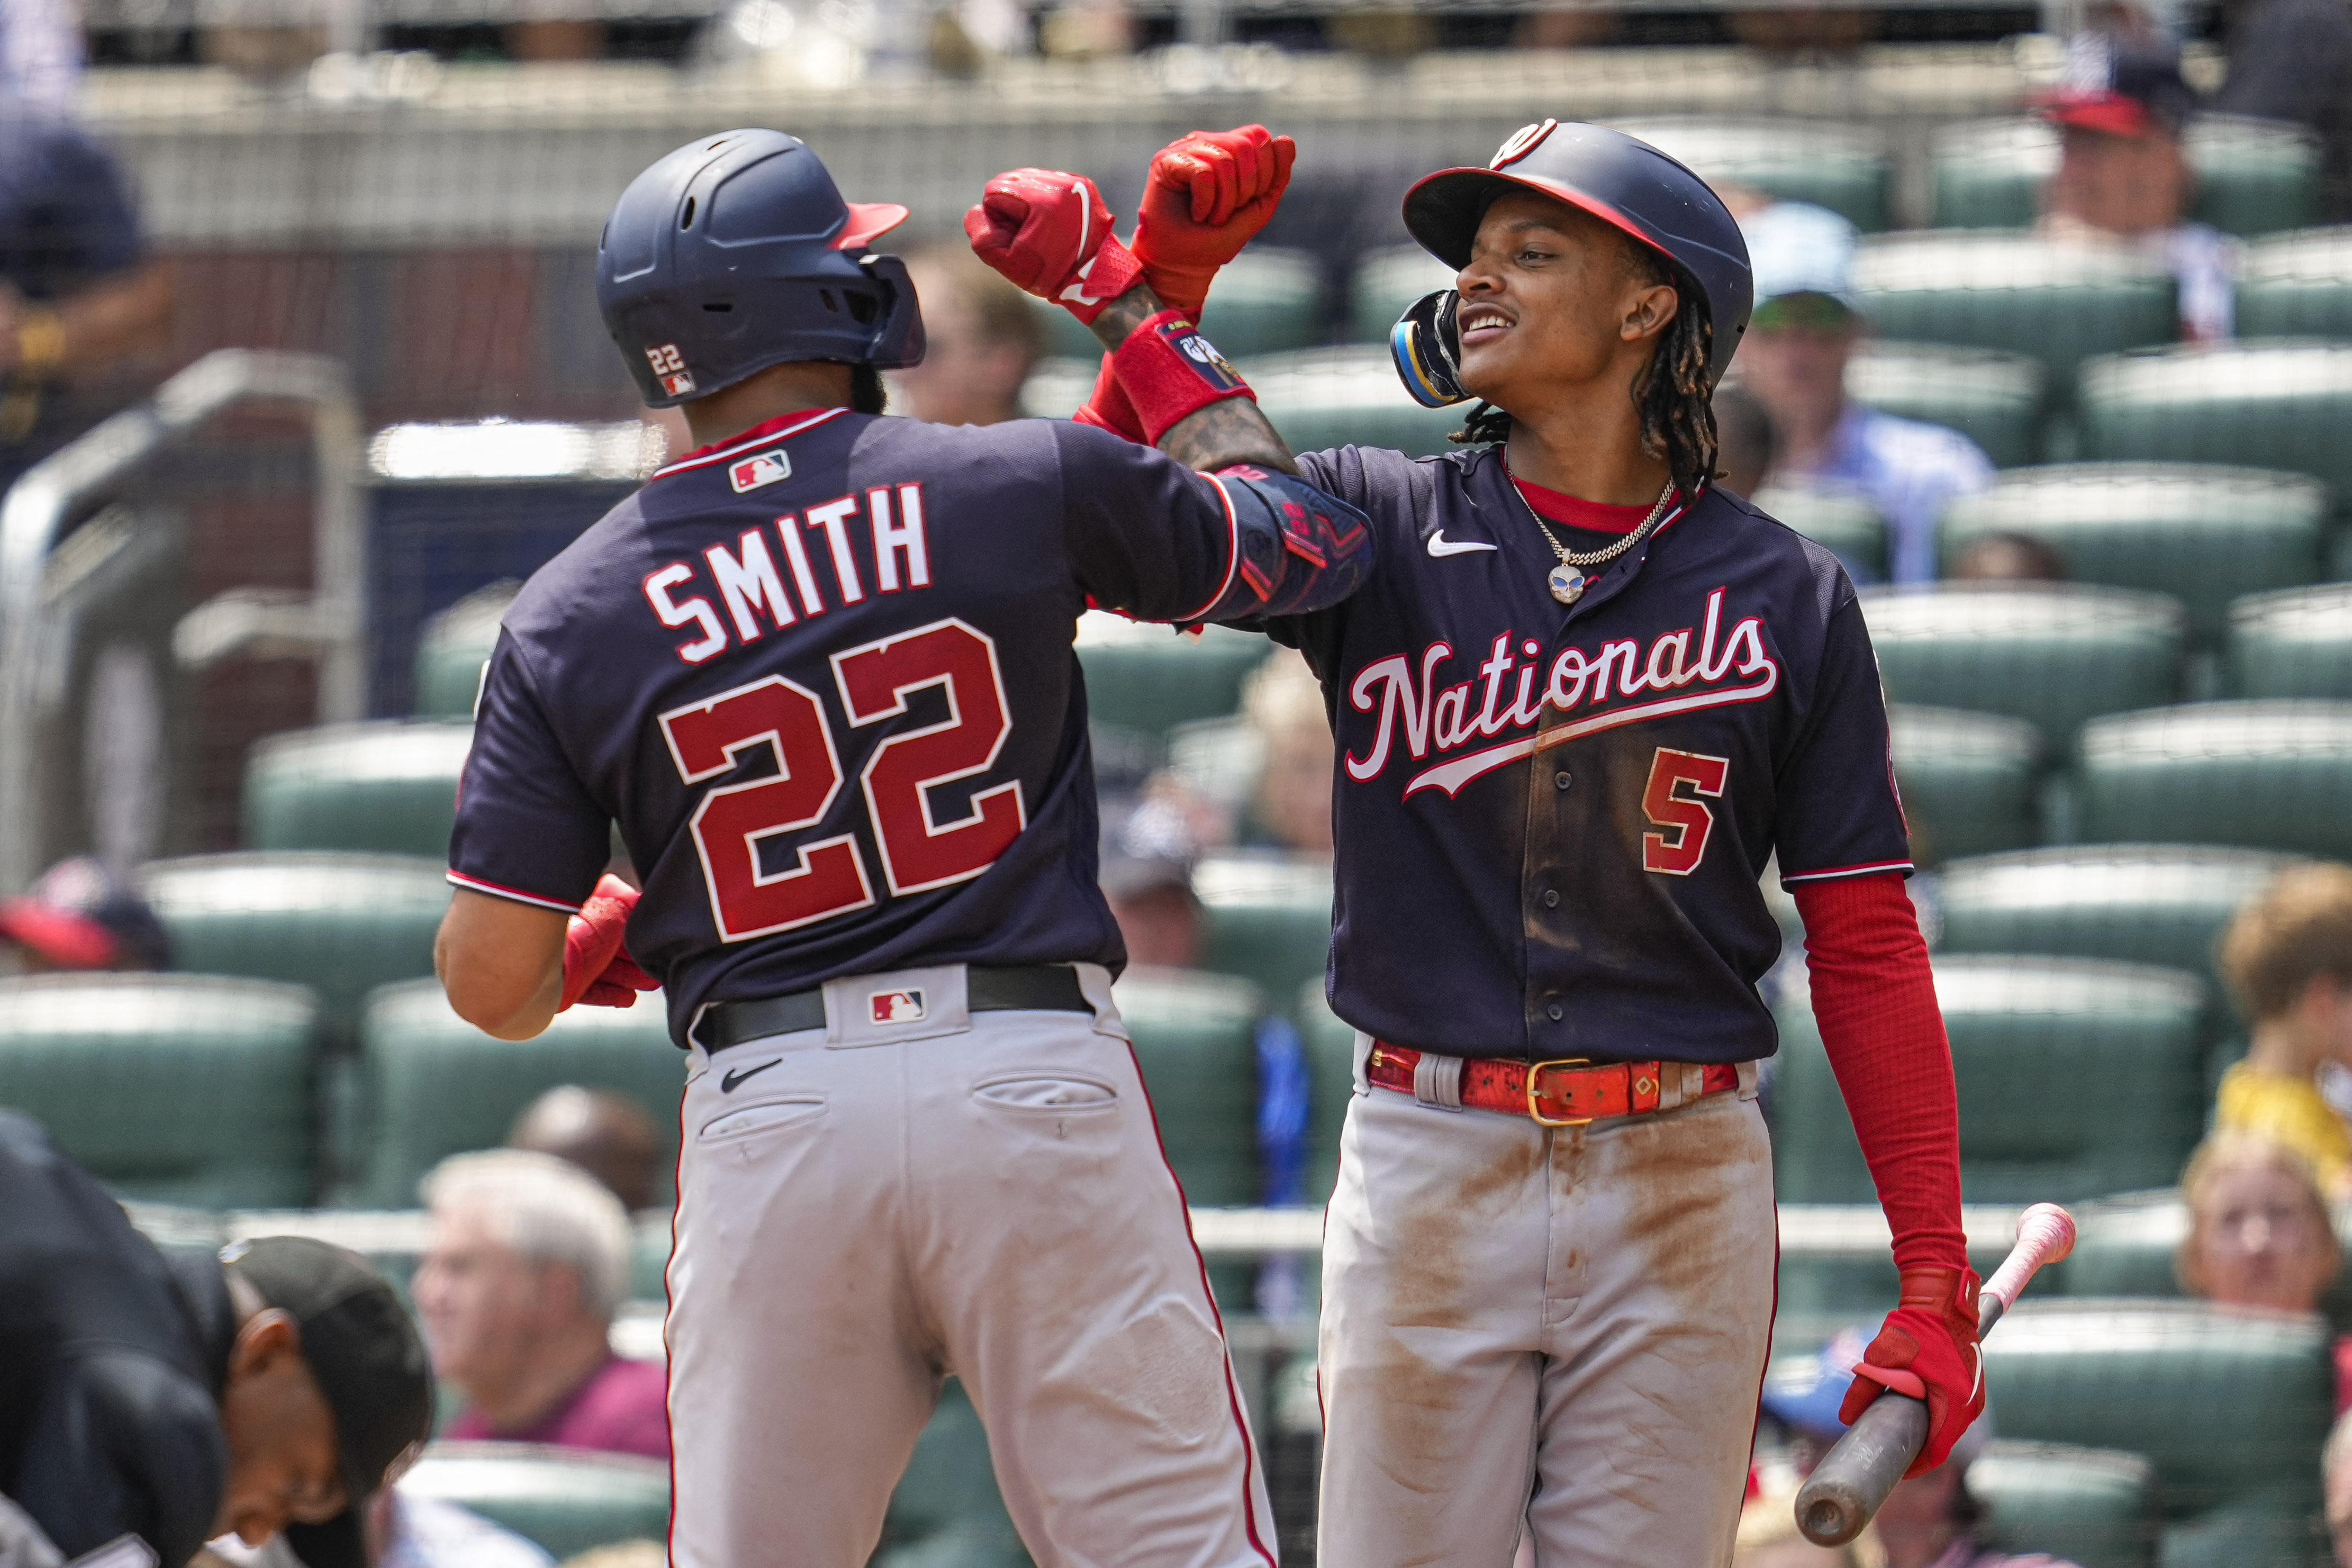 Braves rally from early deficit, beat rival Nationals 7-6